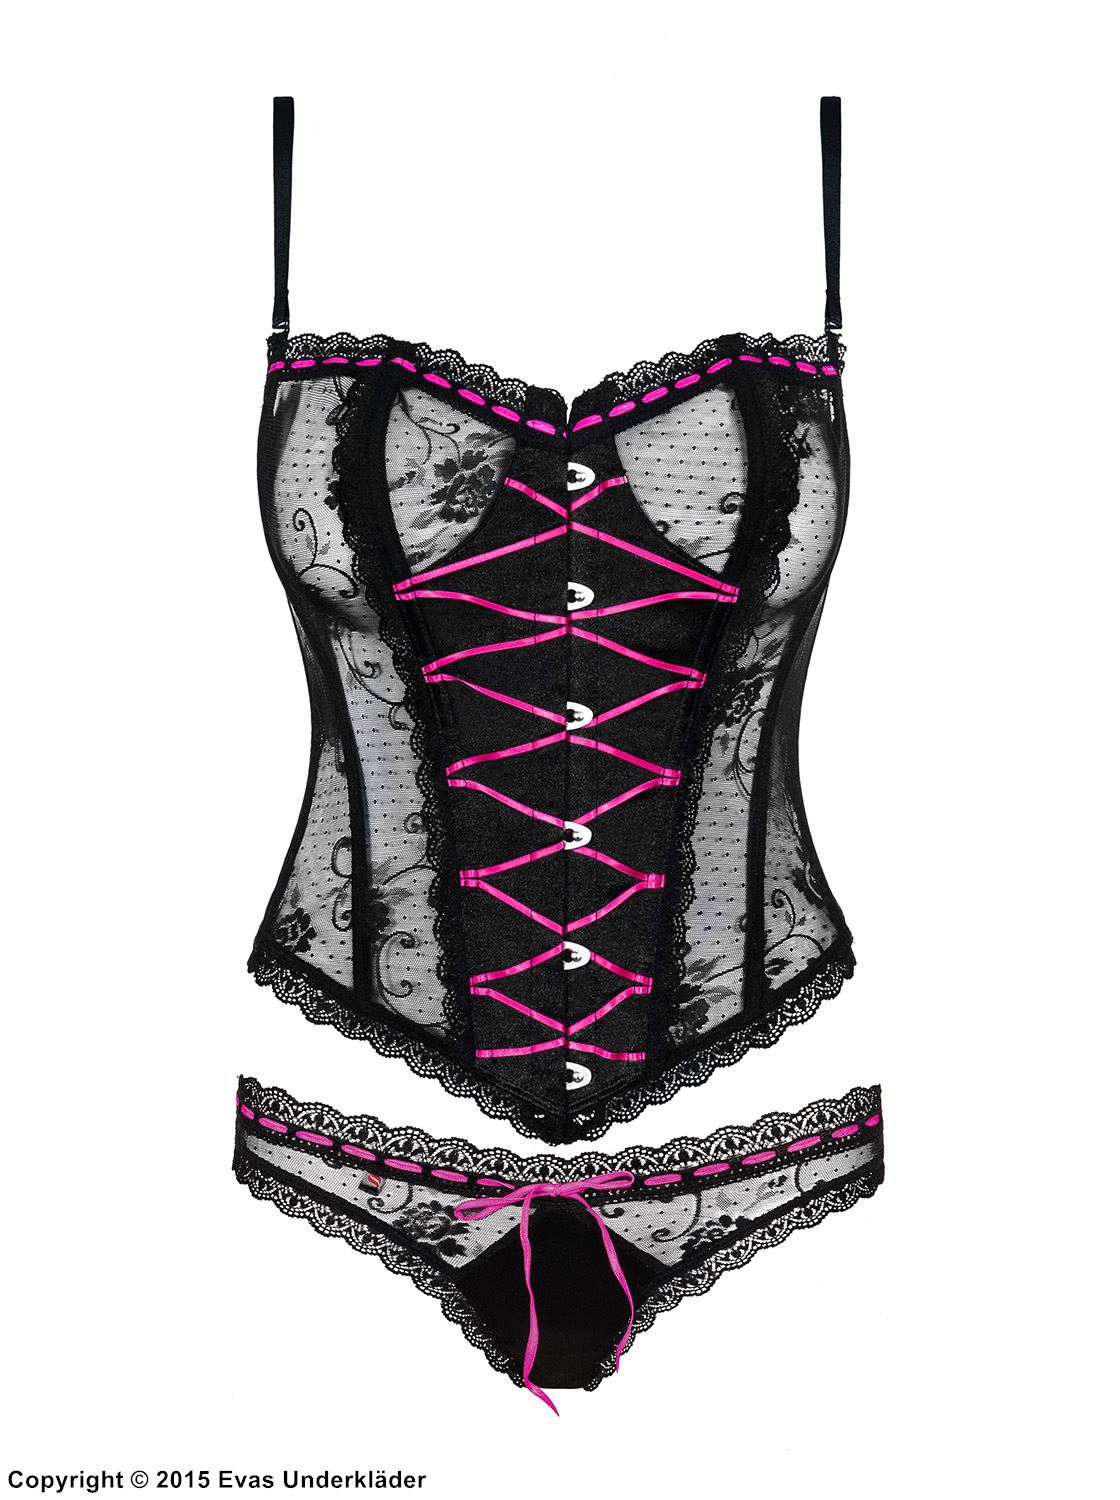 Soft corset with pink satin ribbons